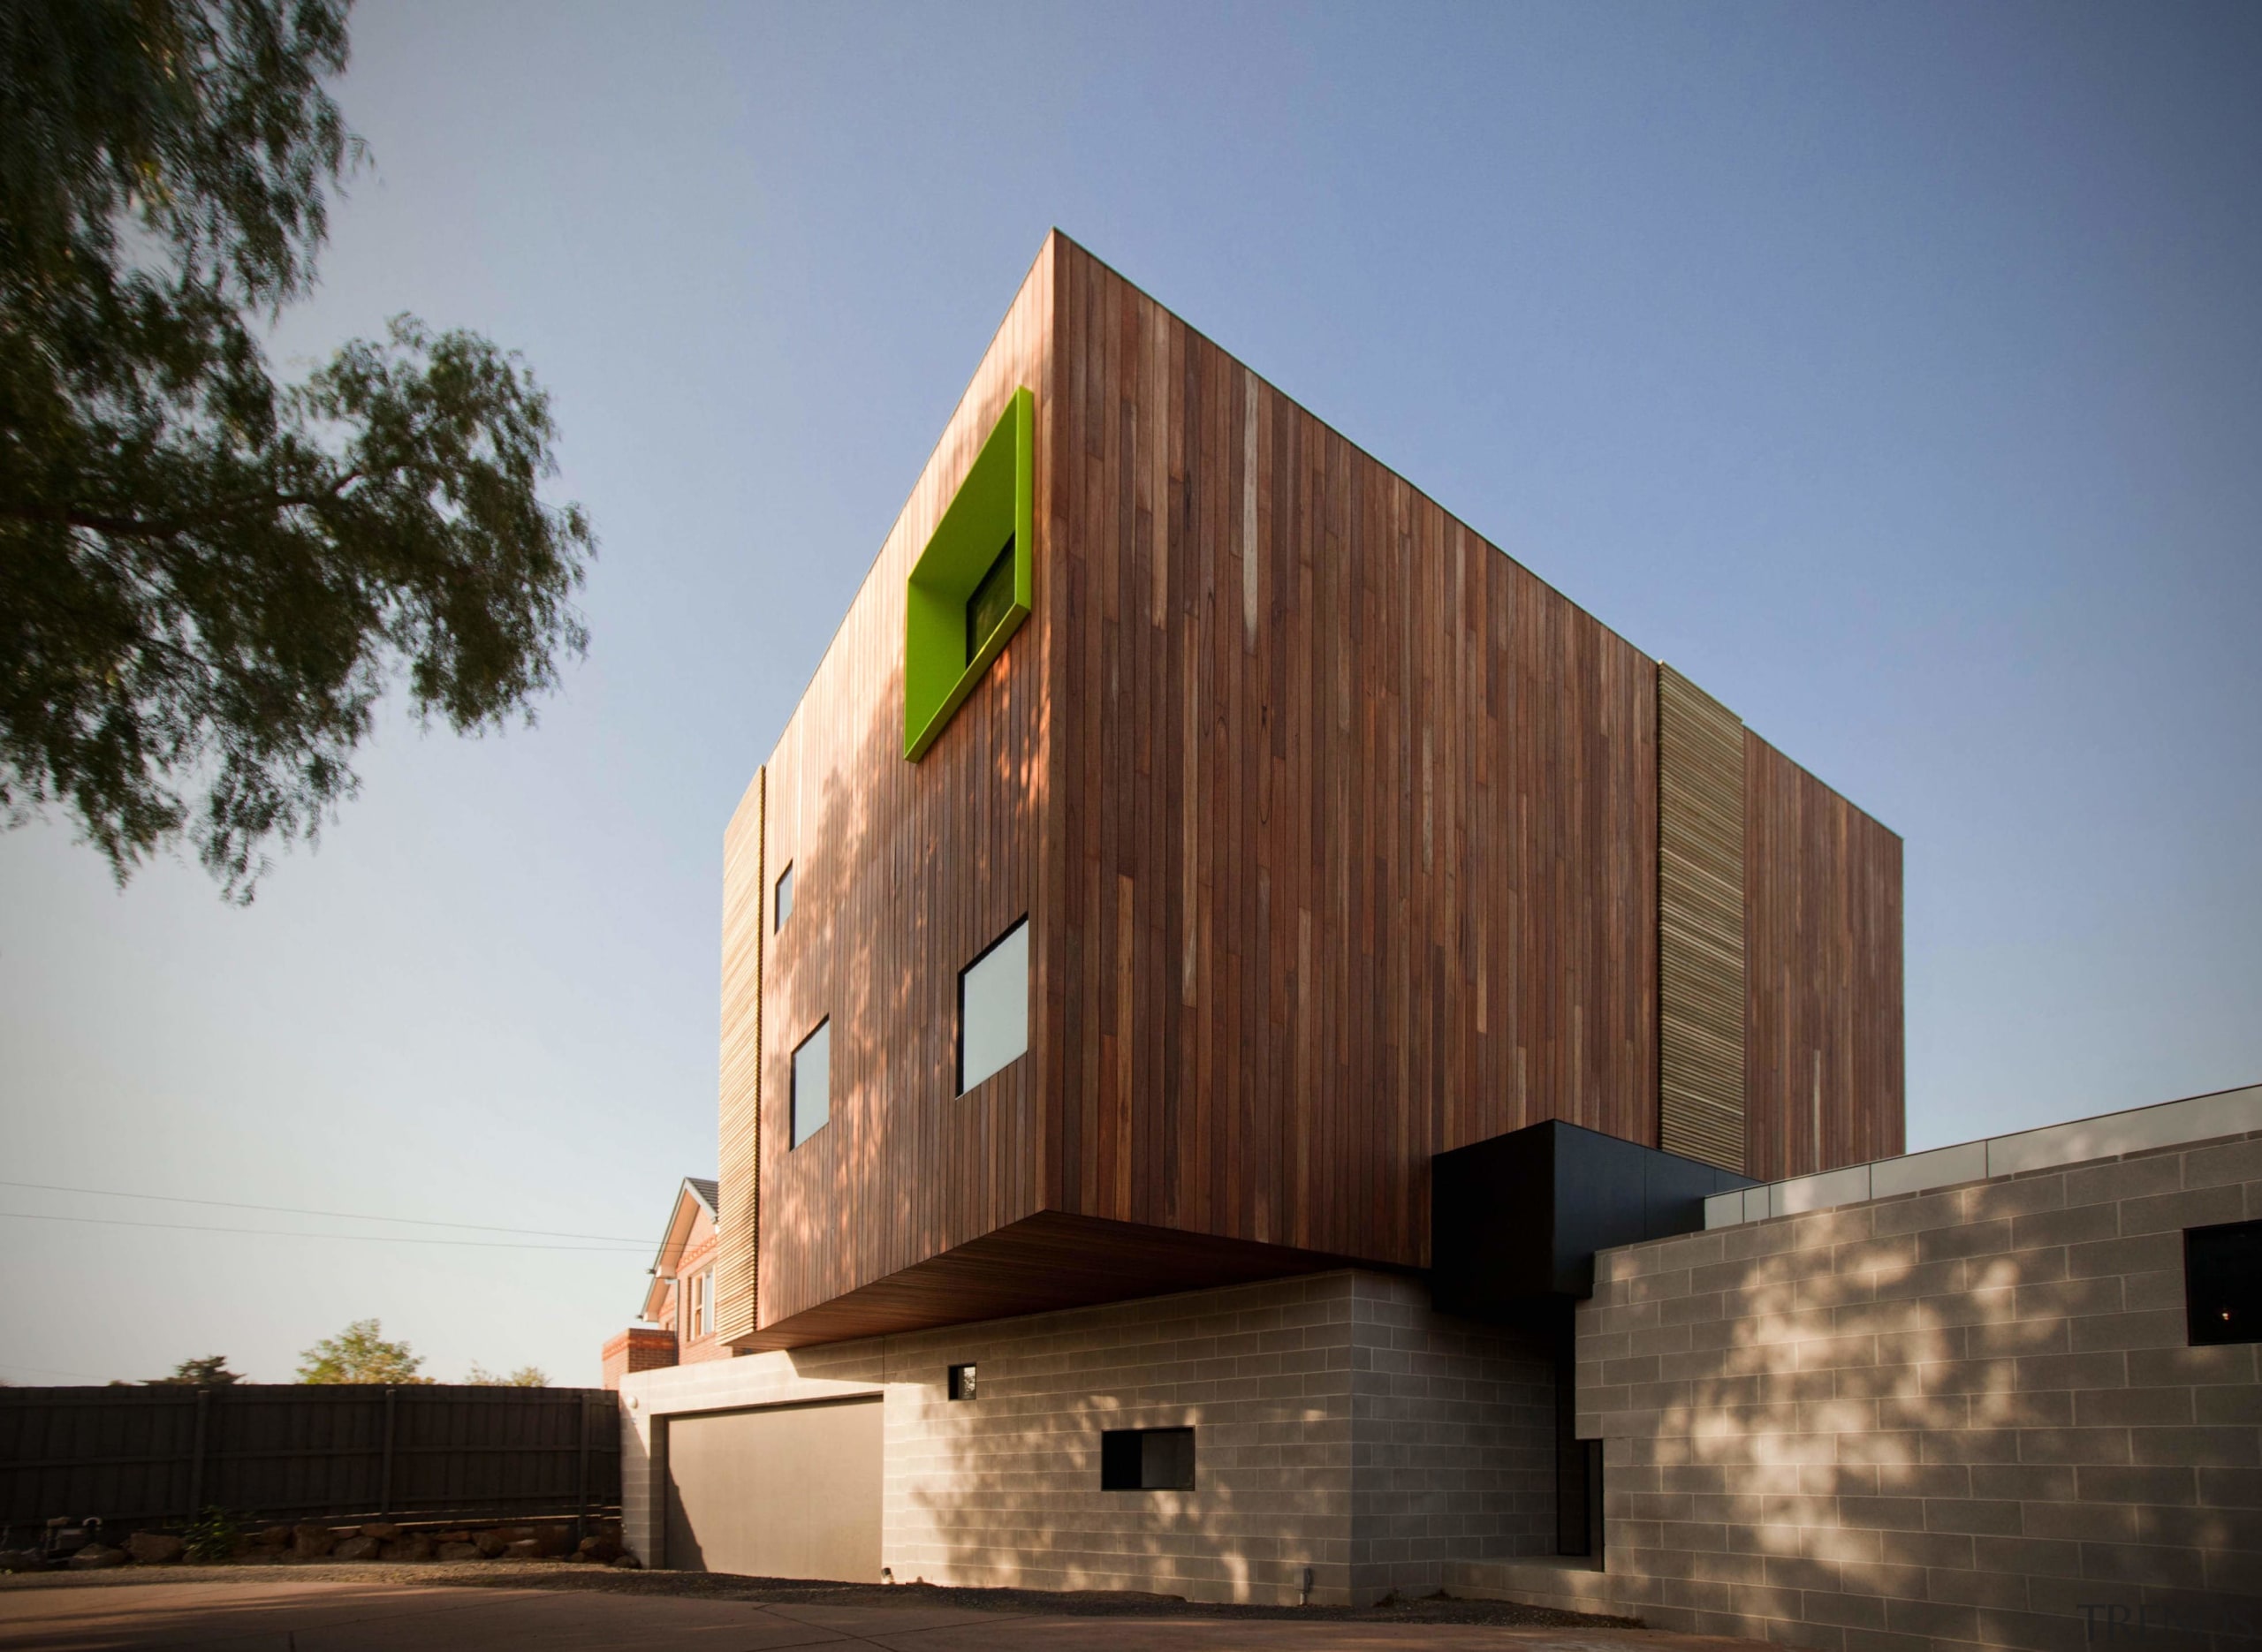 Another view of the box form of the architecture, building, facade, house, sky, wood, brown